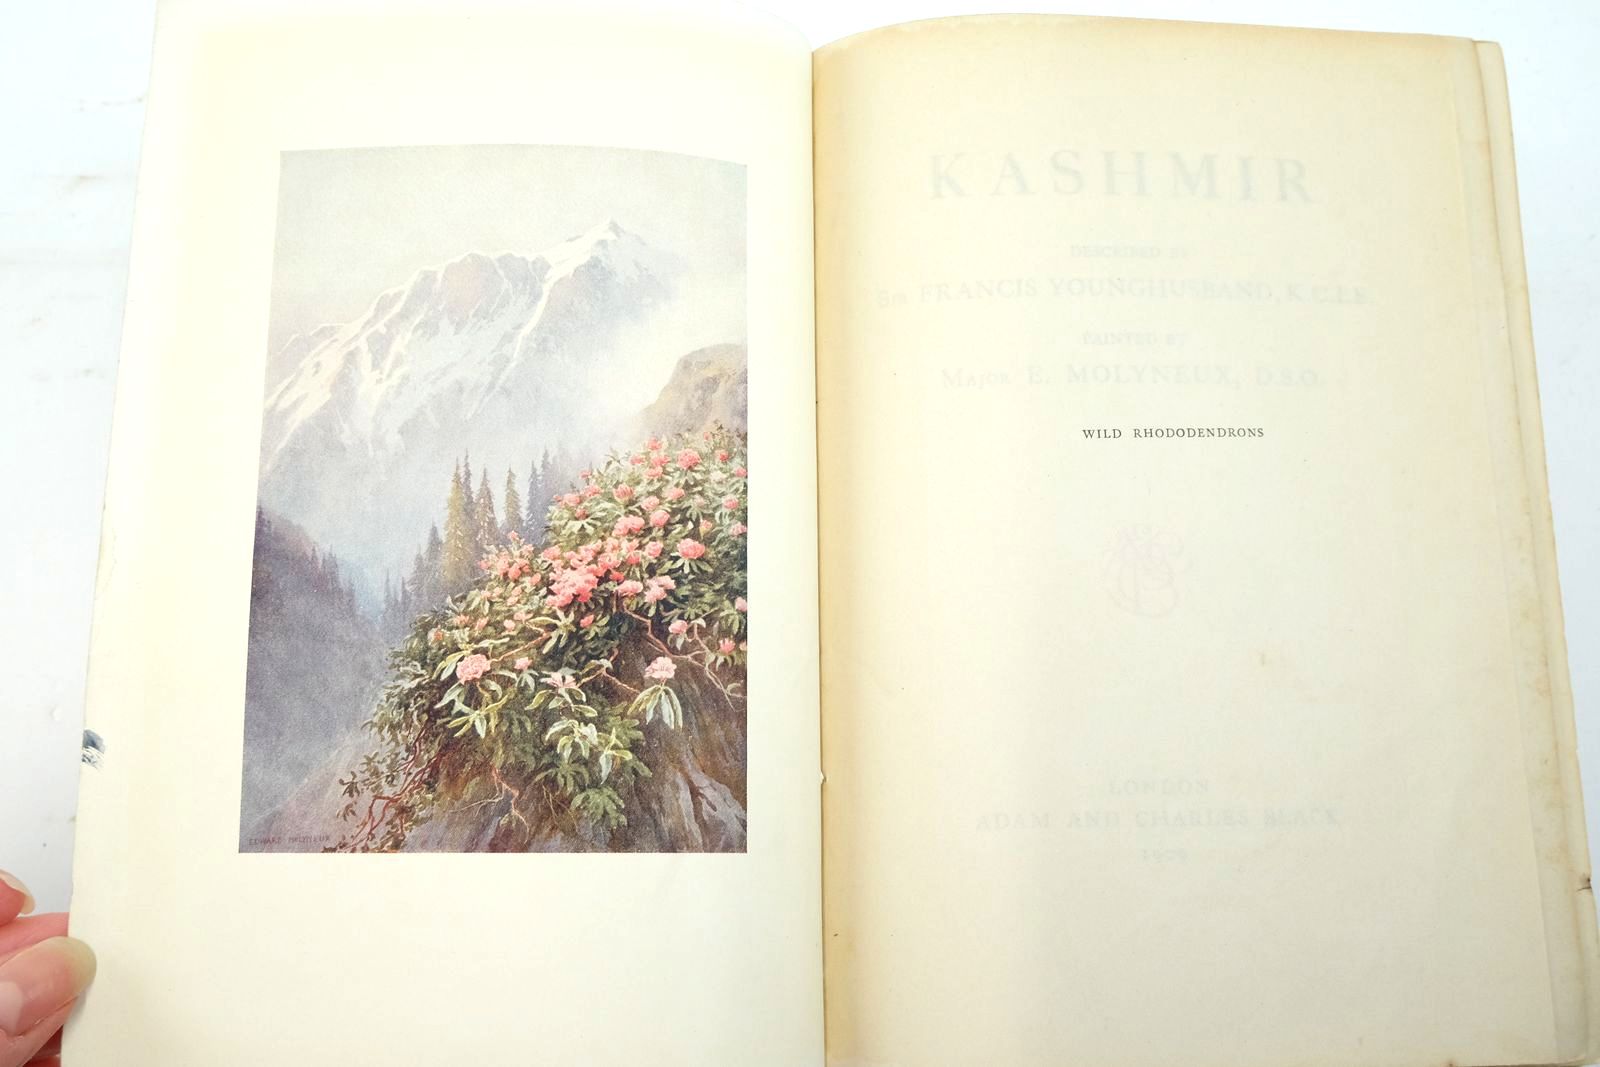 Photo of KASHMIR written by Younghusband, Francis illustrated by Molyneux, E. published by A. & C. Black Ltd. (STOCK CODE: 2137173)  for sale by Stella & Rose's Books